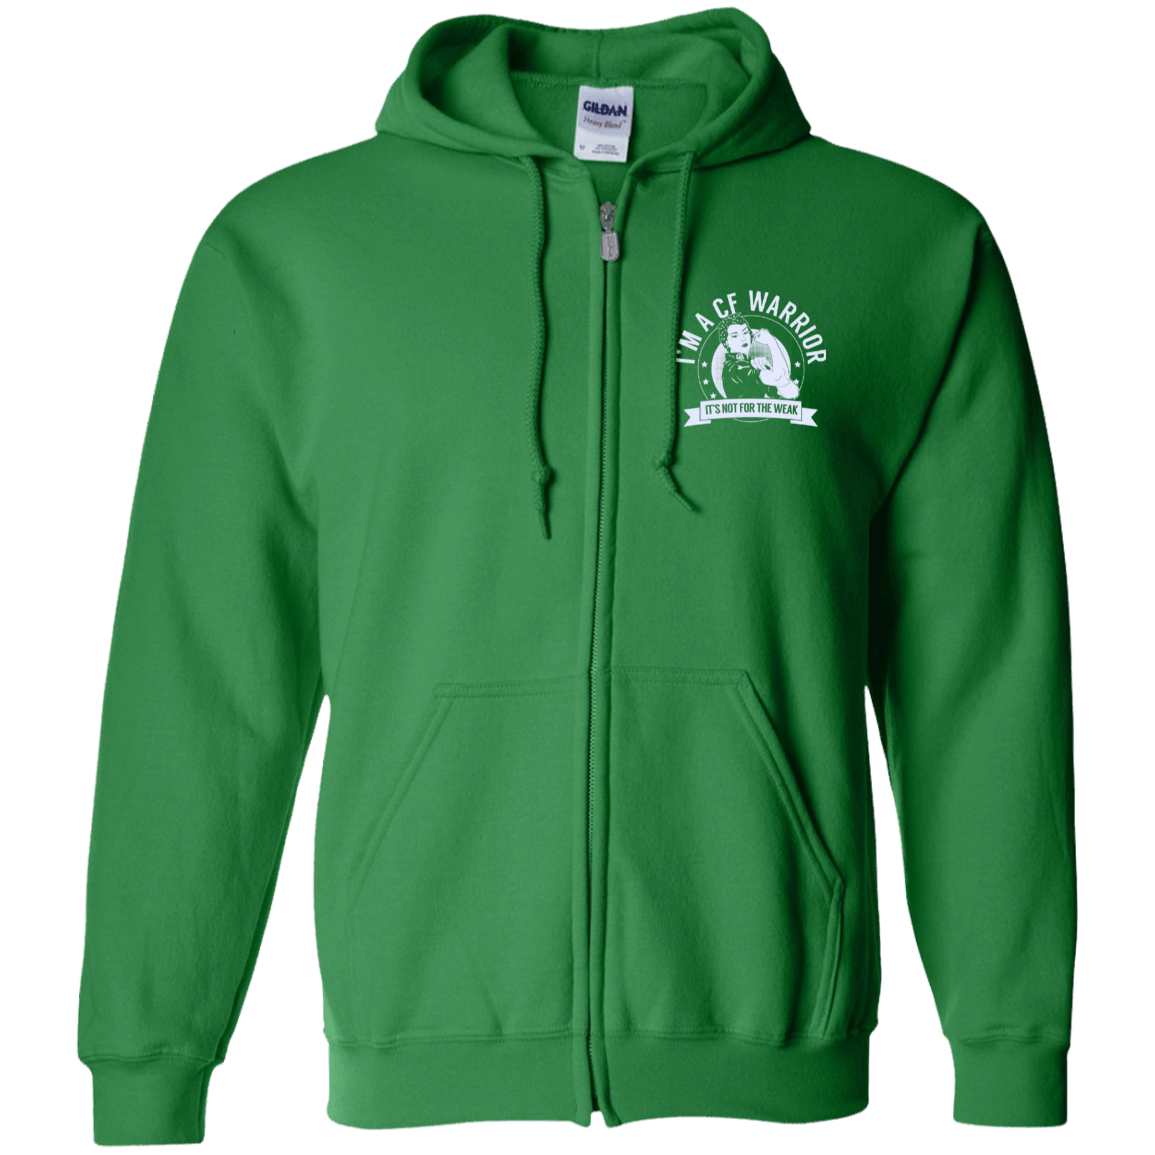 Cystic Fibrosis Warrior Not For The Weak Zip Up Hooded Sweatshirt - The Unchargeables